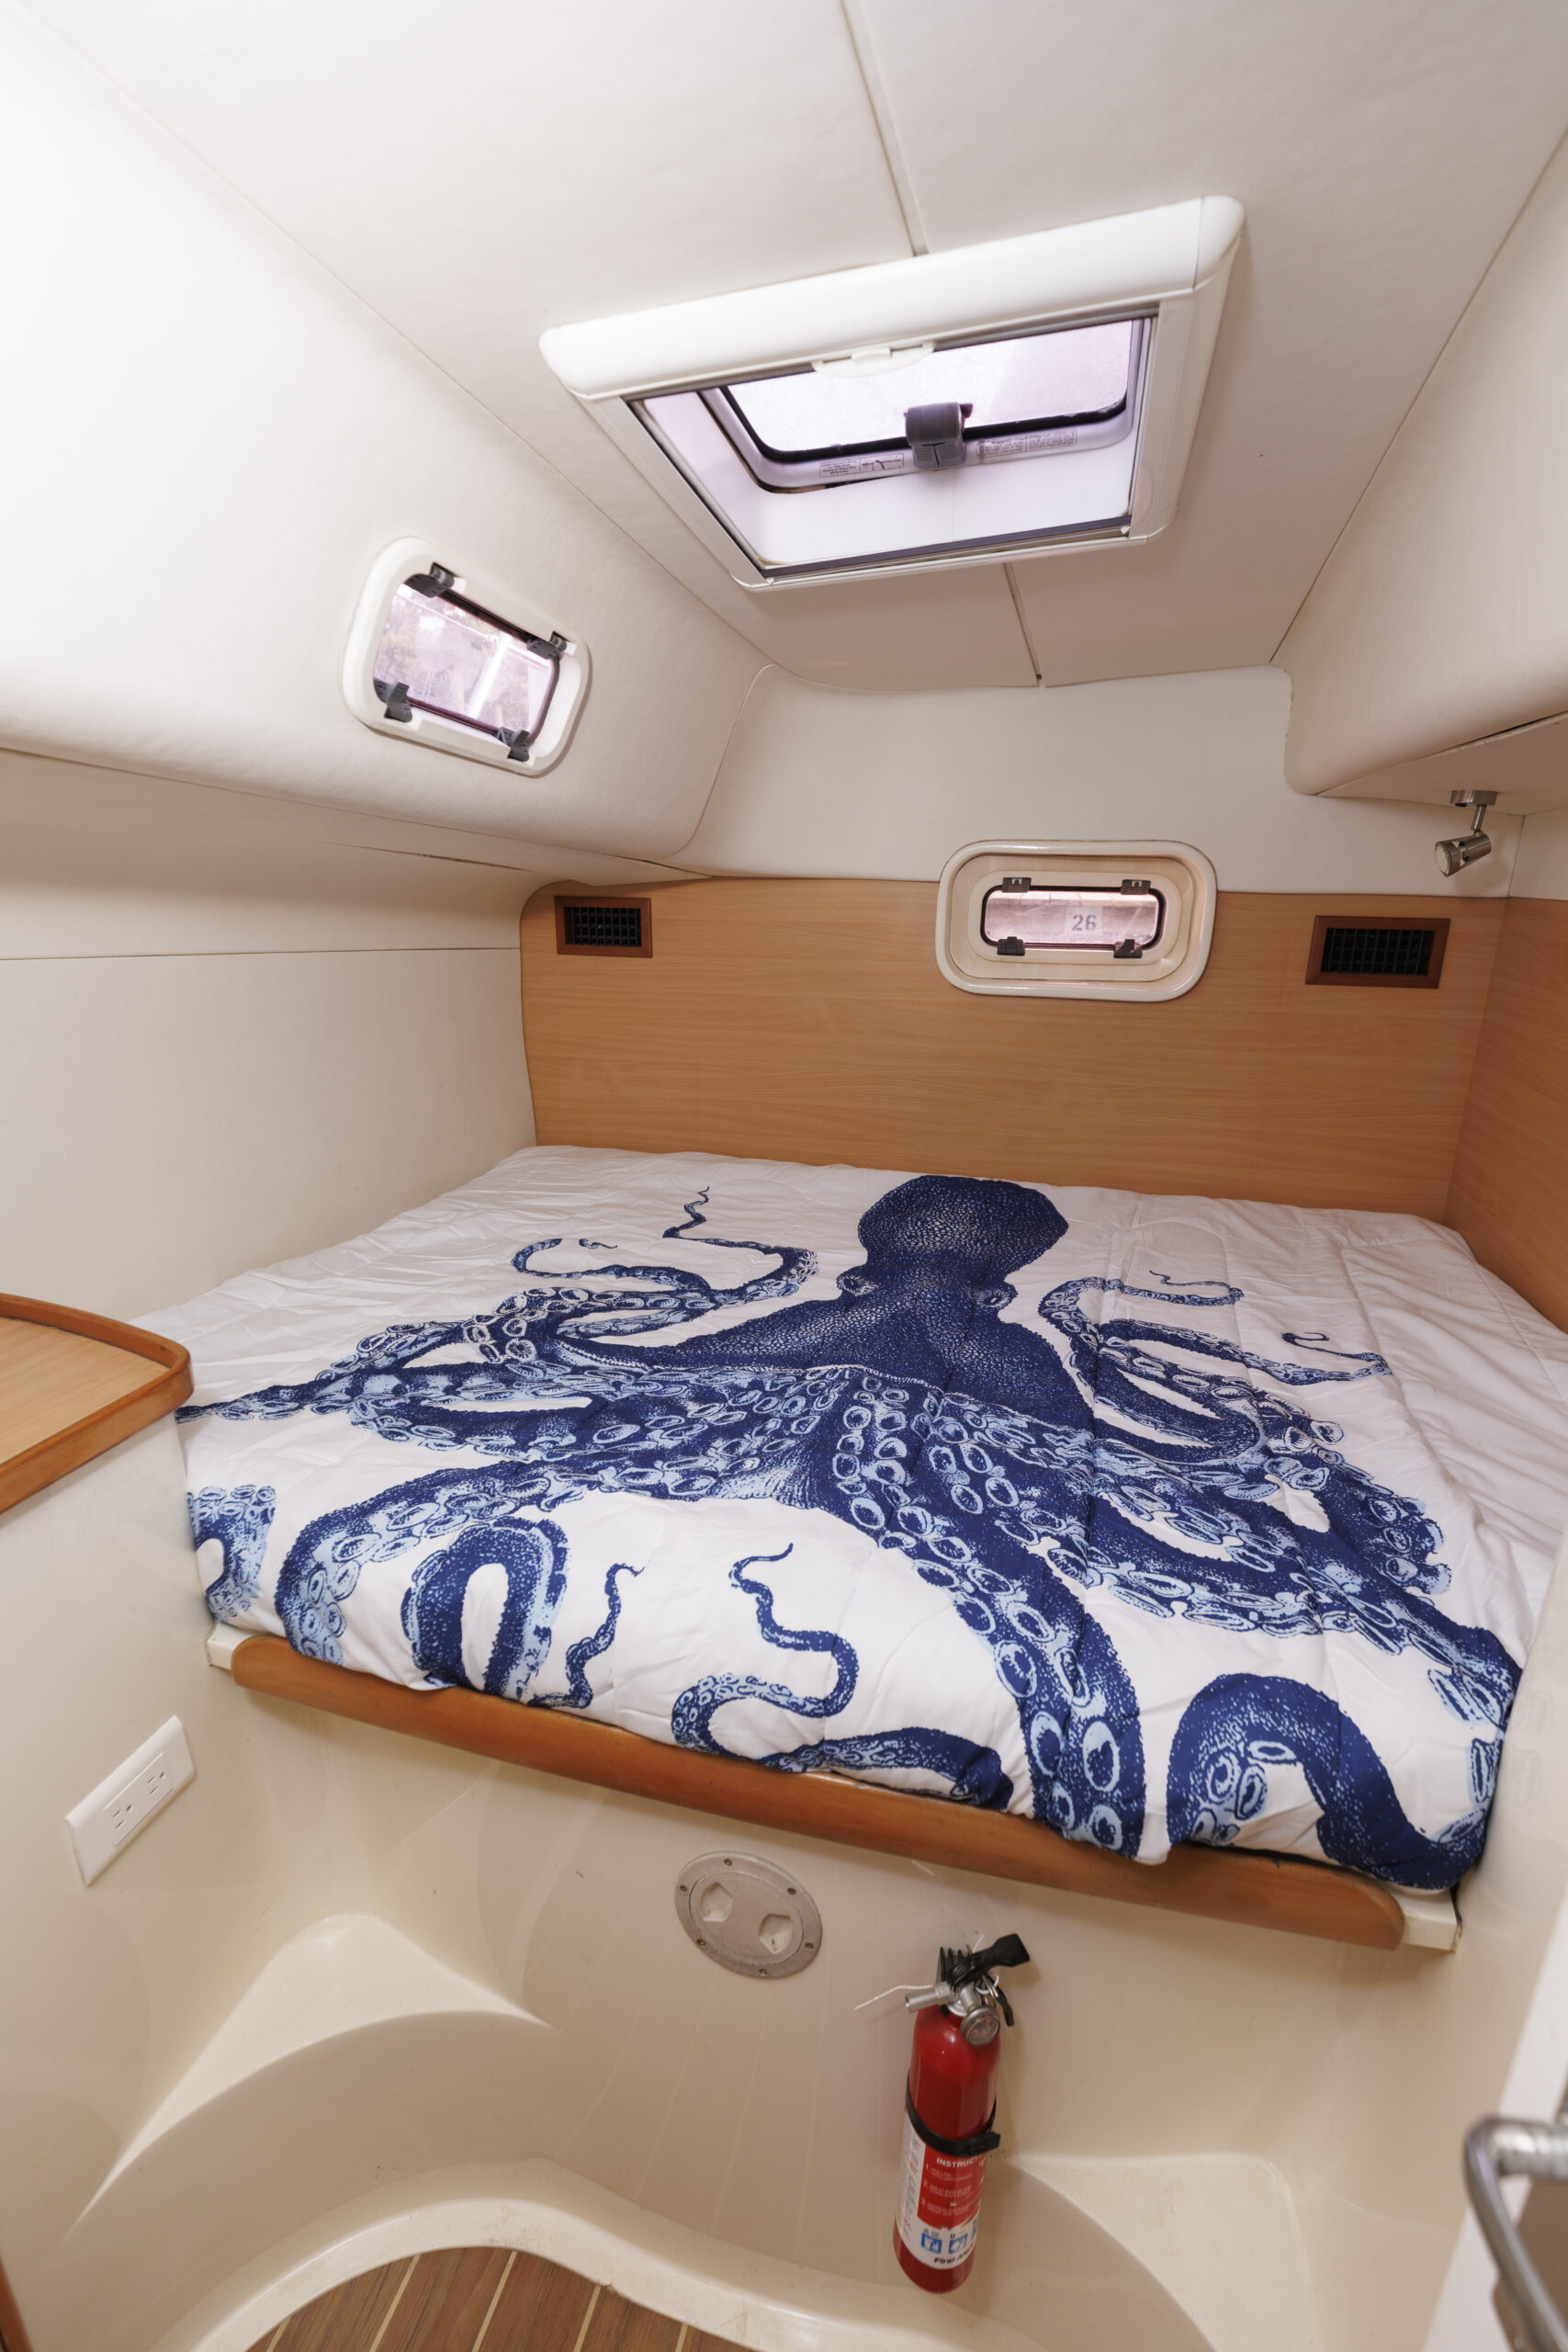 A bed with an octopus on it in the back of a boat.